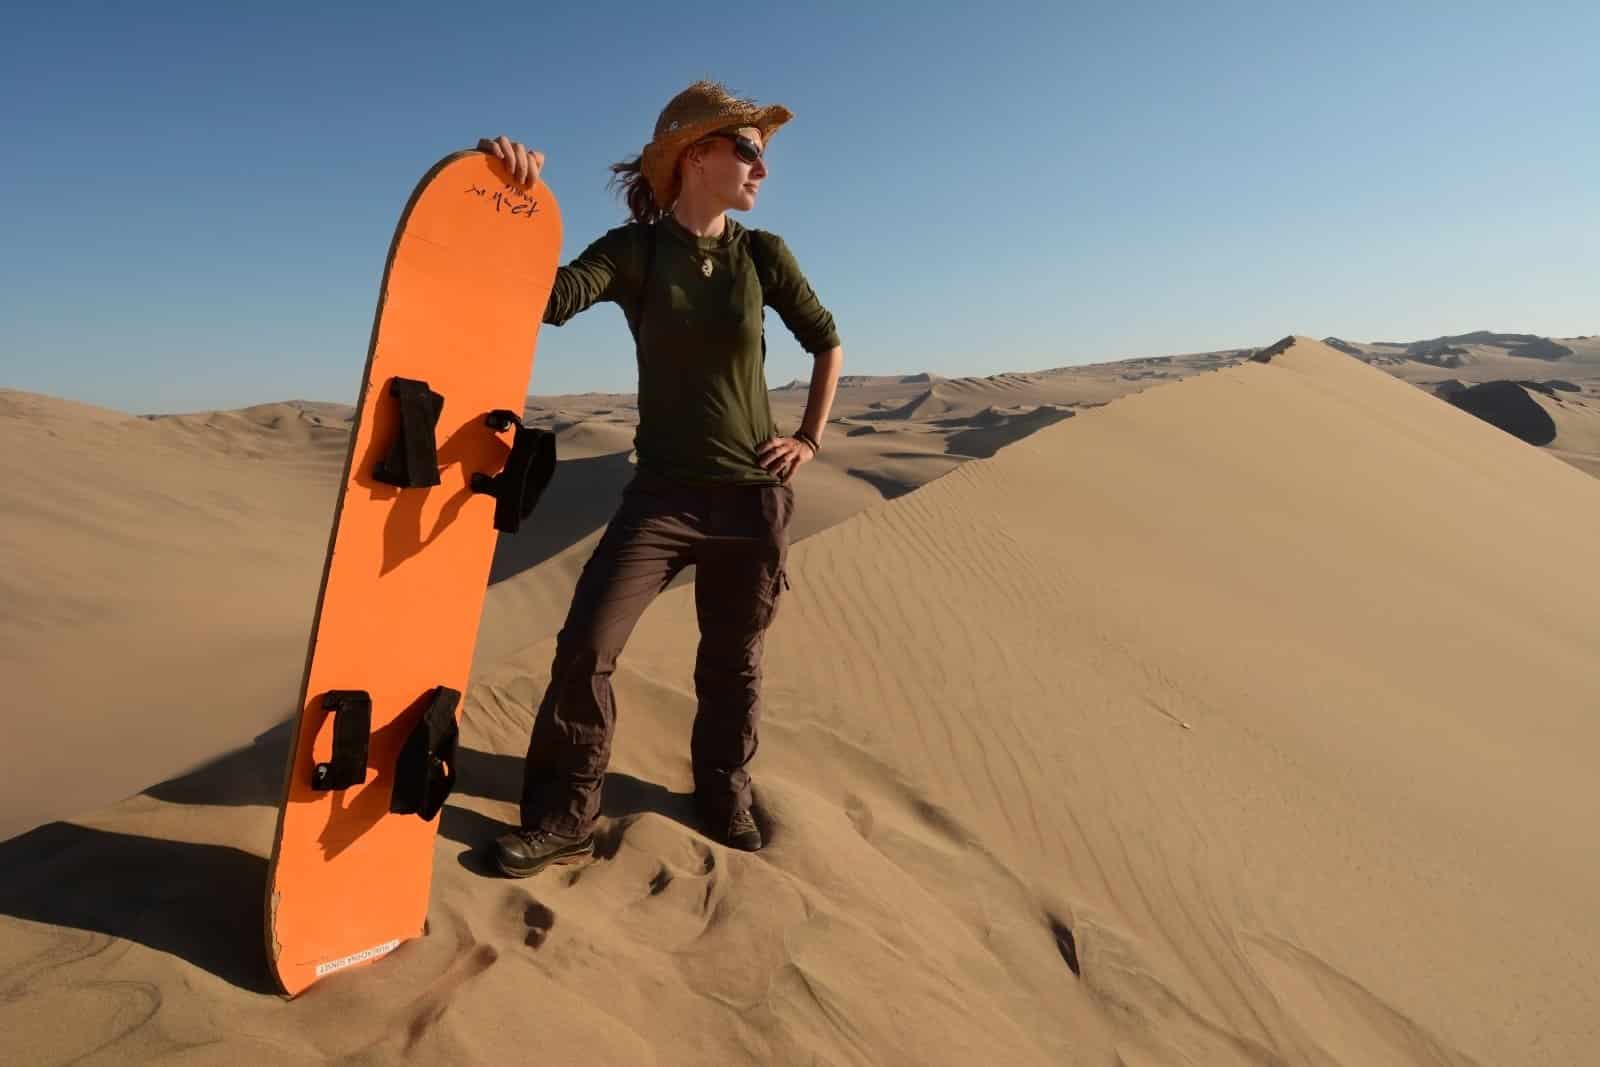 <p class="wp-caption-text">Image Credit: Shutterstock / Pavel Svoboda Photography</p>  <p>Trade snow for sand and shred the towering dunes of Huacachina on a sandboard. Feel the thrill of carving down steep slopes and catching air as you navigate the otherworldly desert landscape of Peru’s oasis town.</p>